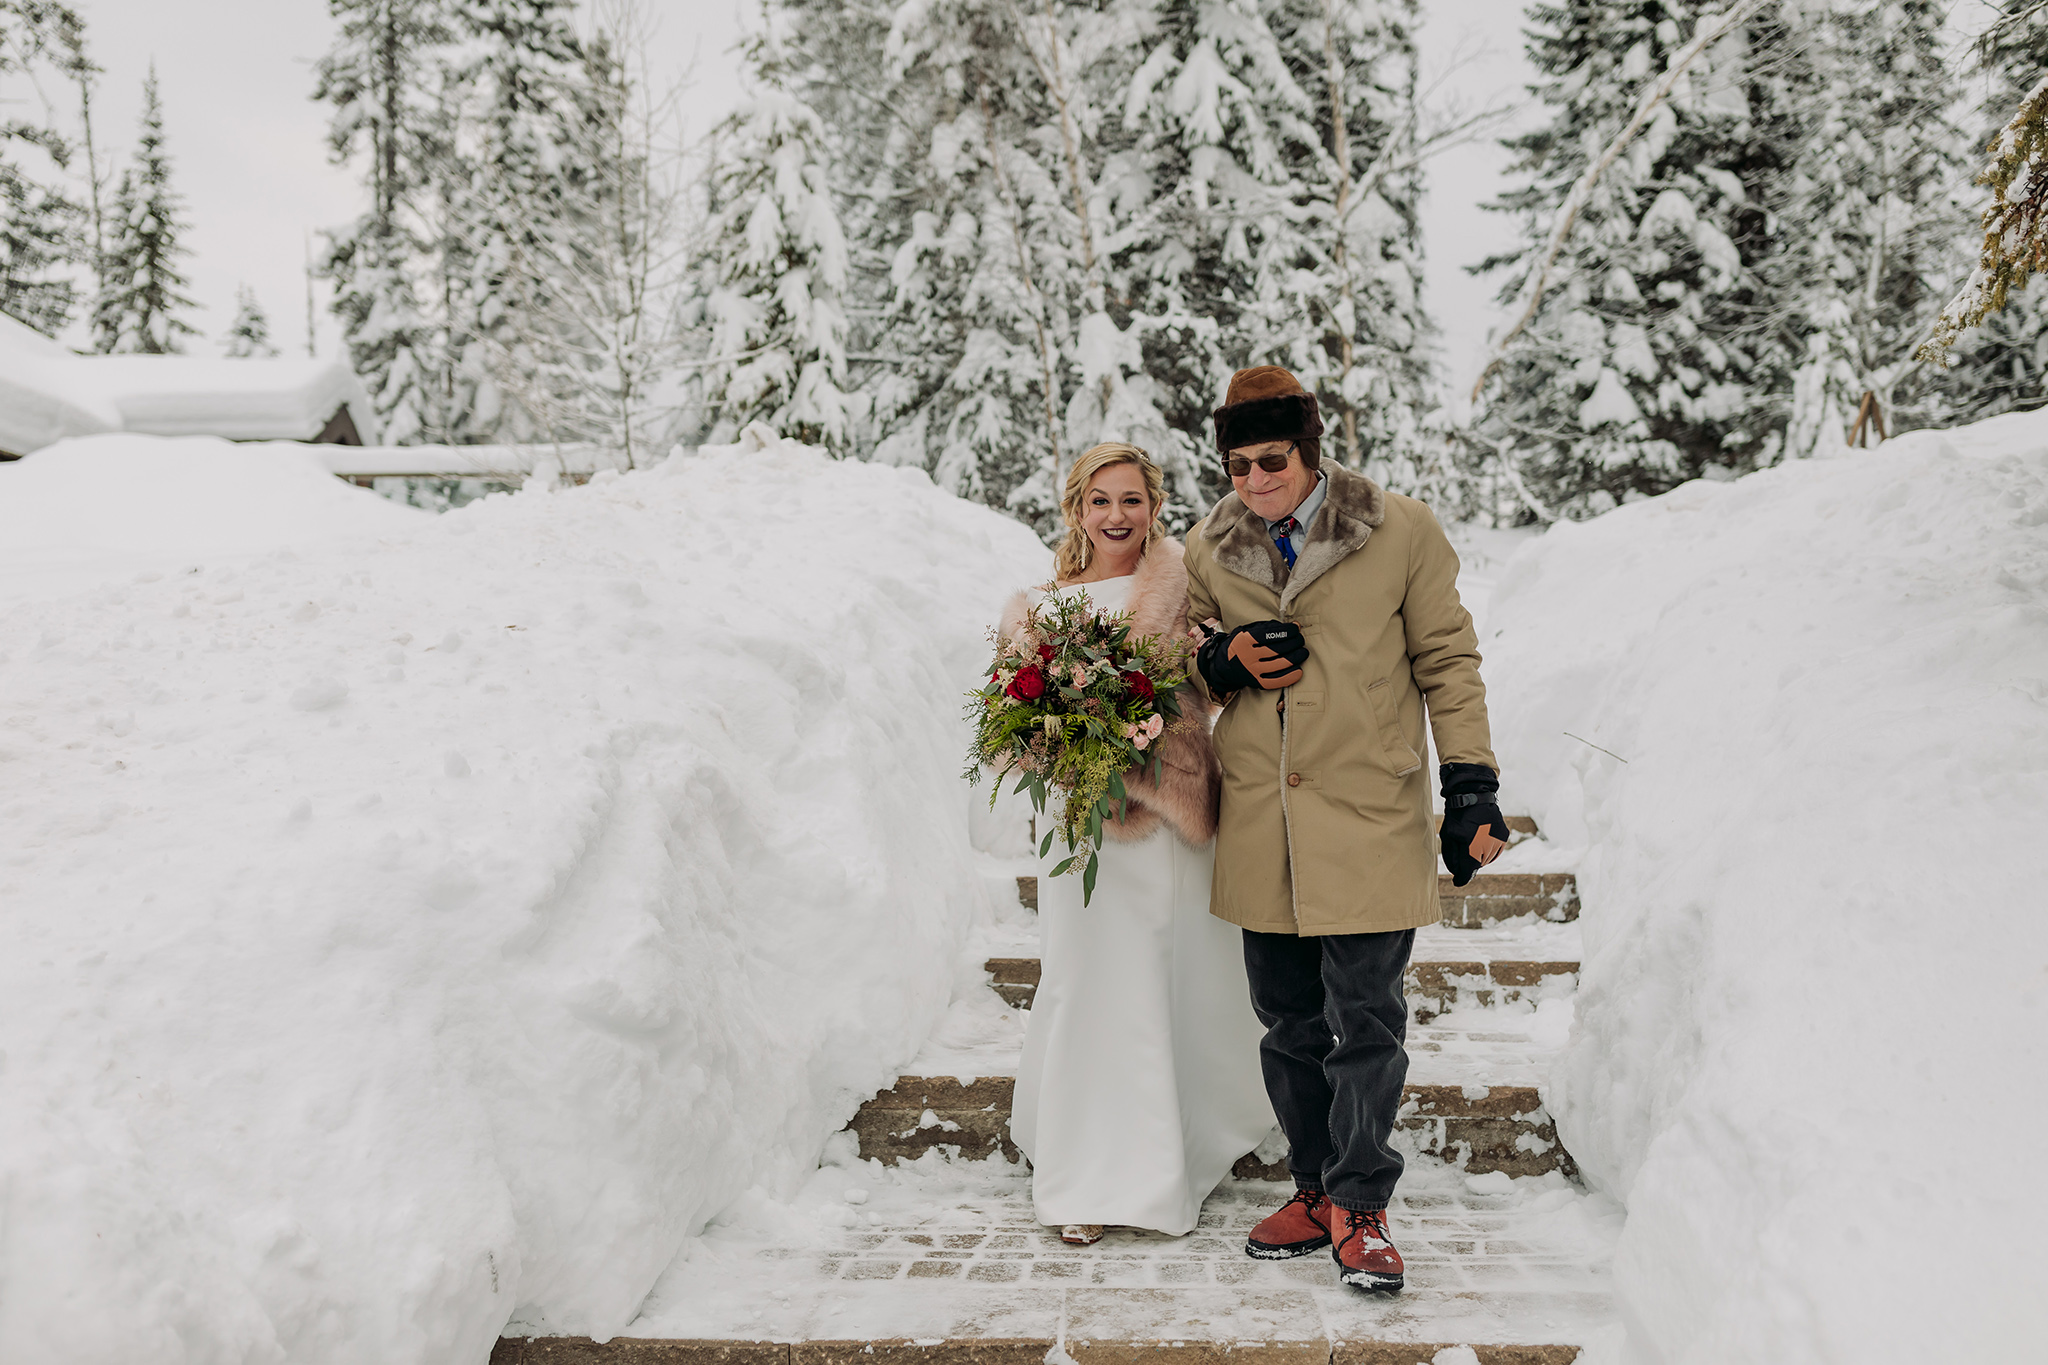 Emerald Lake Lodge outdoor winter wedding ceremony in a real life snow globe photographed by mountain elopement photographer ENV Photography